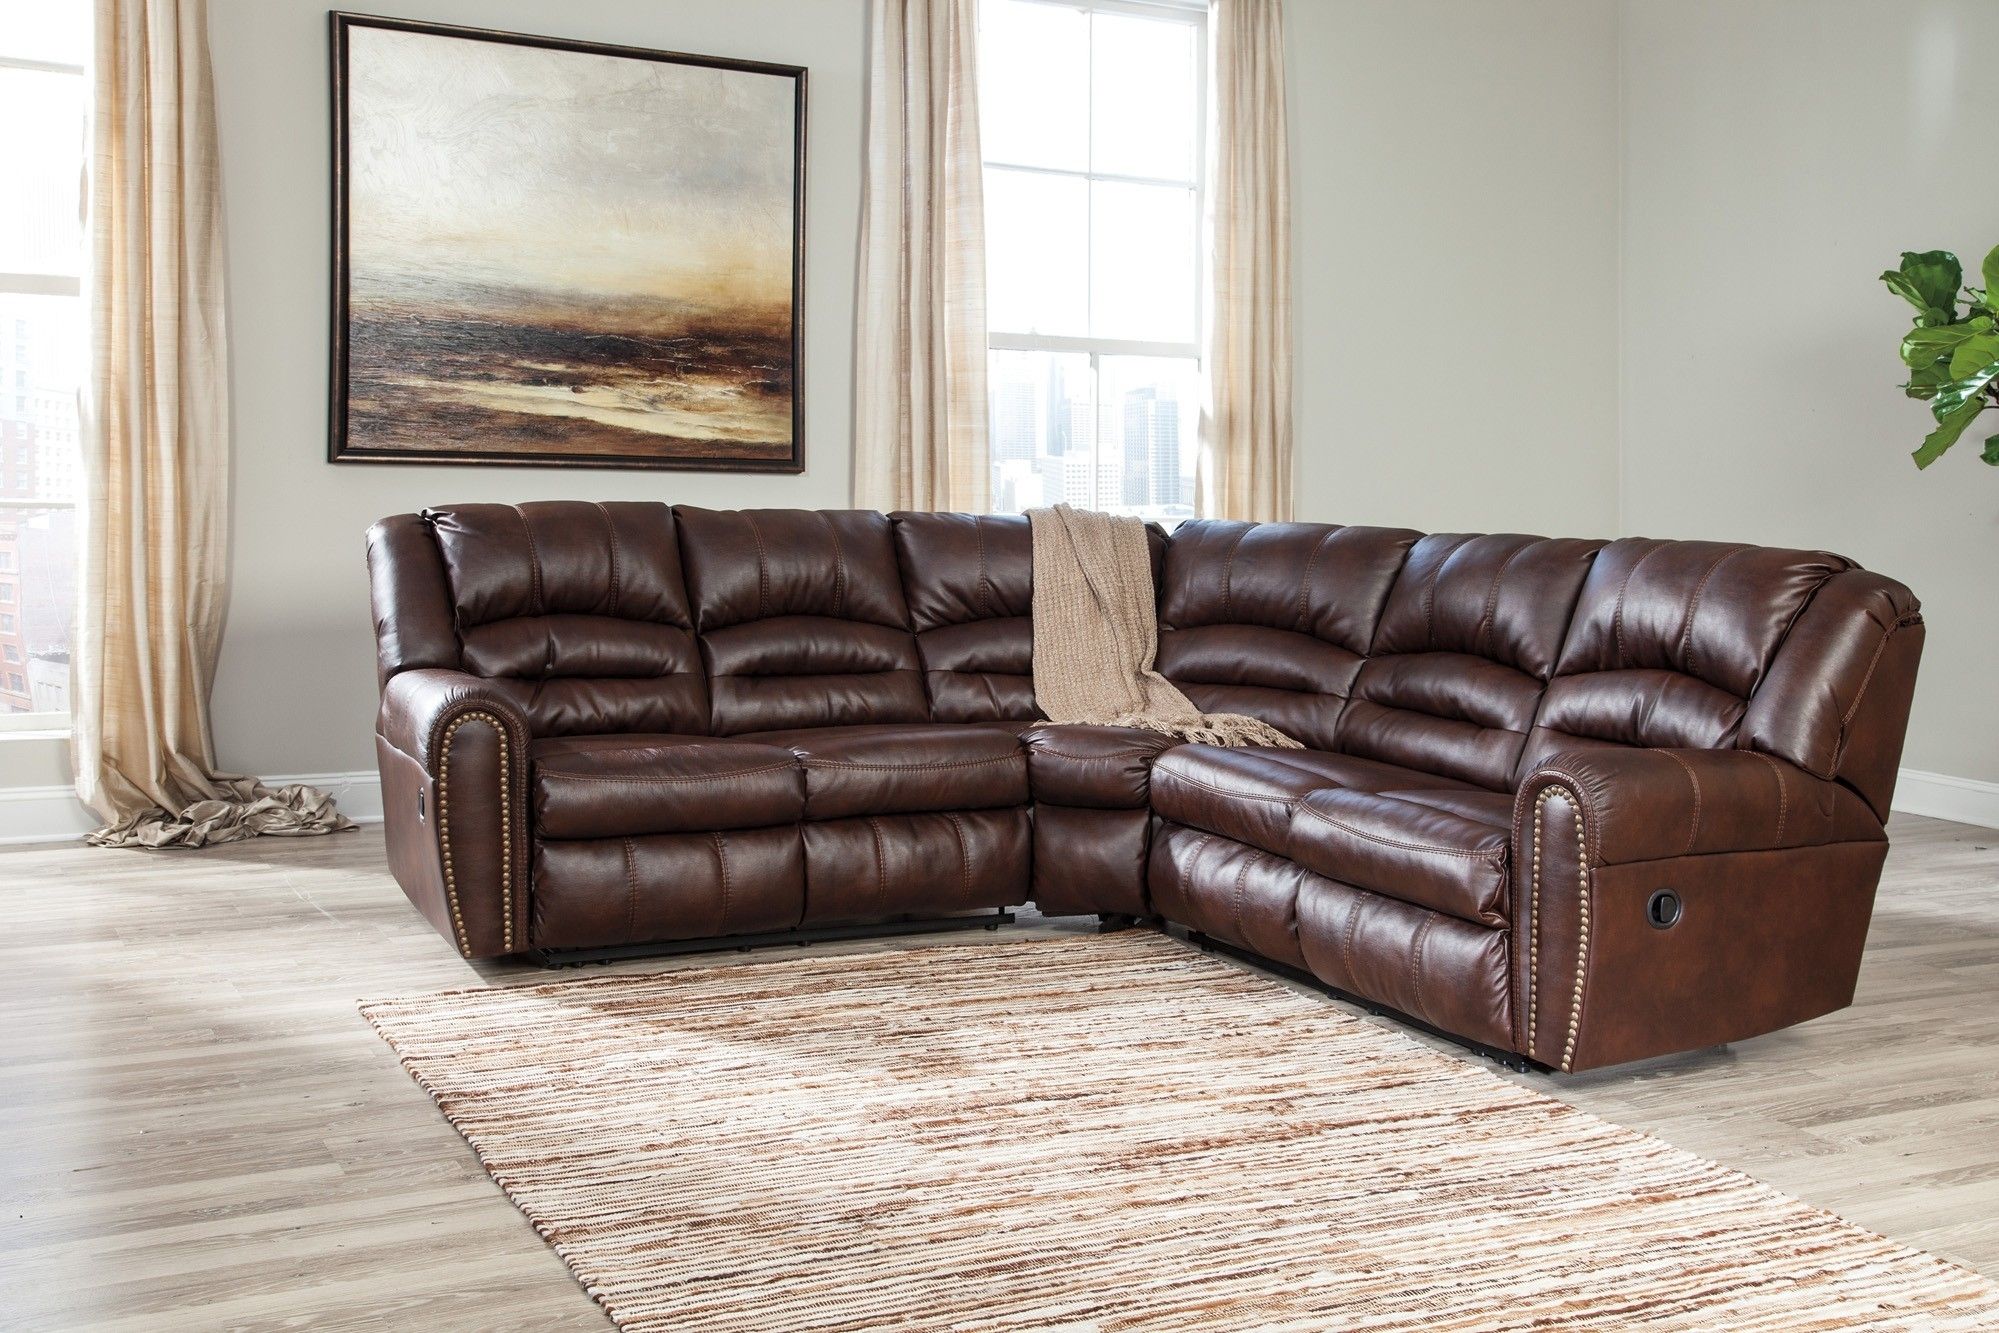 Manzanola Chocolate 2 Piece Sectional Sofa For $1, (View 4 of 10)